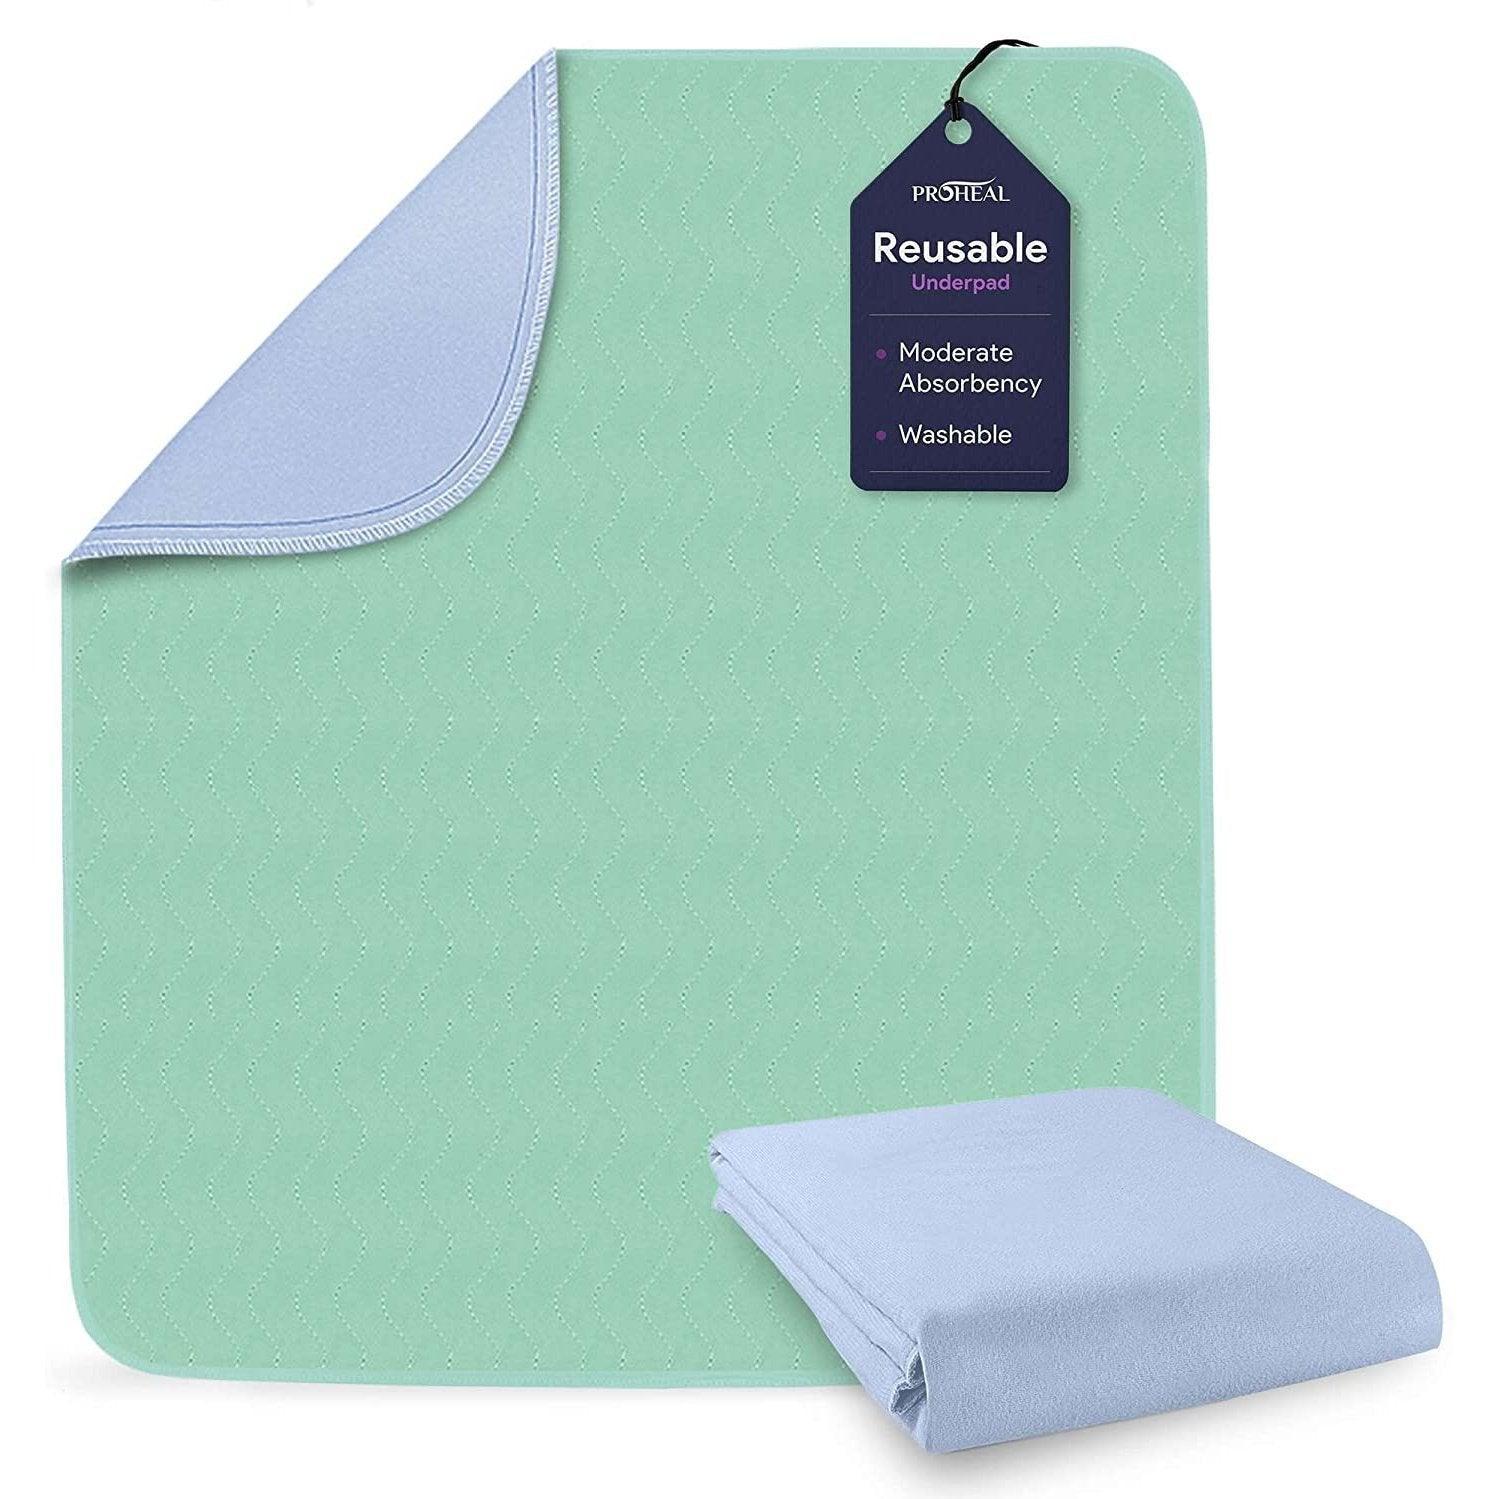 MILDPLUS Washable Bed Pads with 8 Sturdy Handles 34”×52” Extra Large  Reusable Underpads 4-Layers Leakproof Chucks Pads Washable for Incontinence  (1